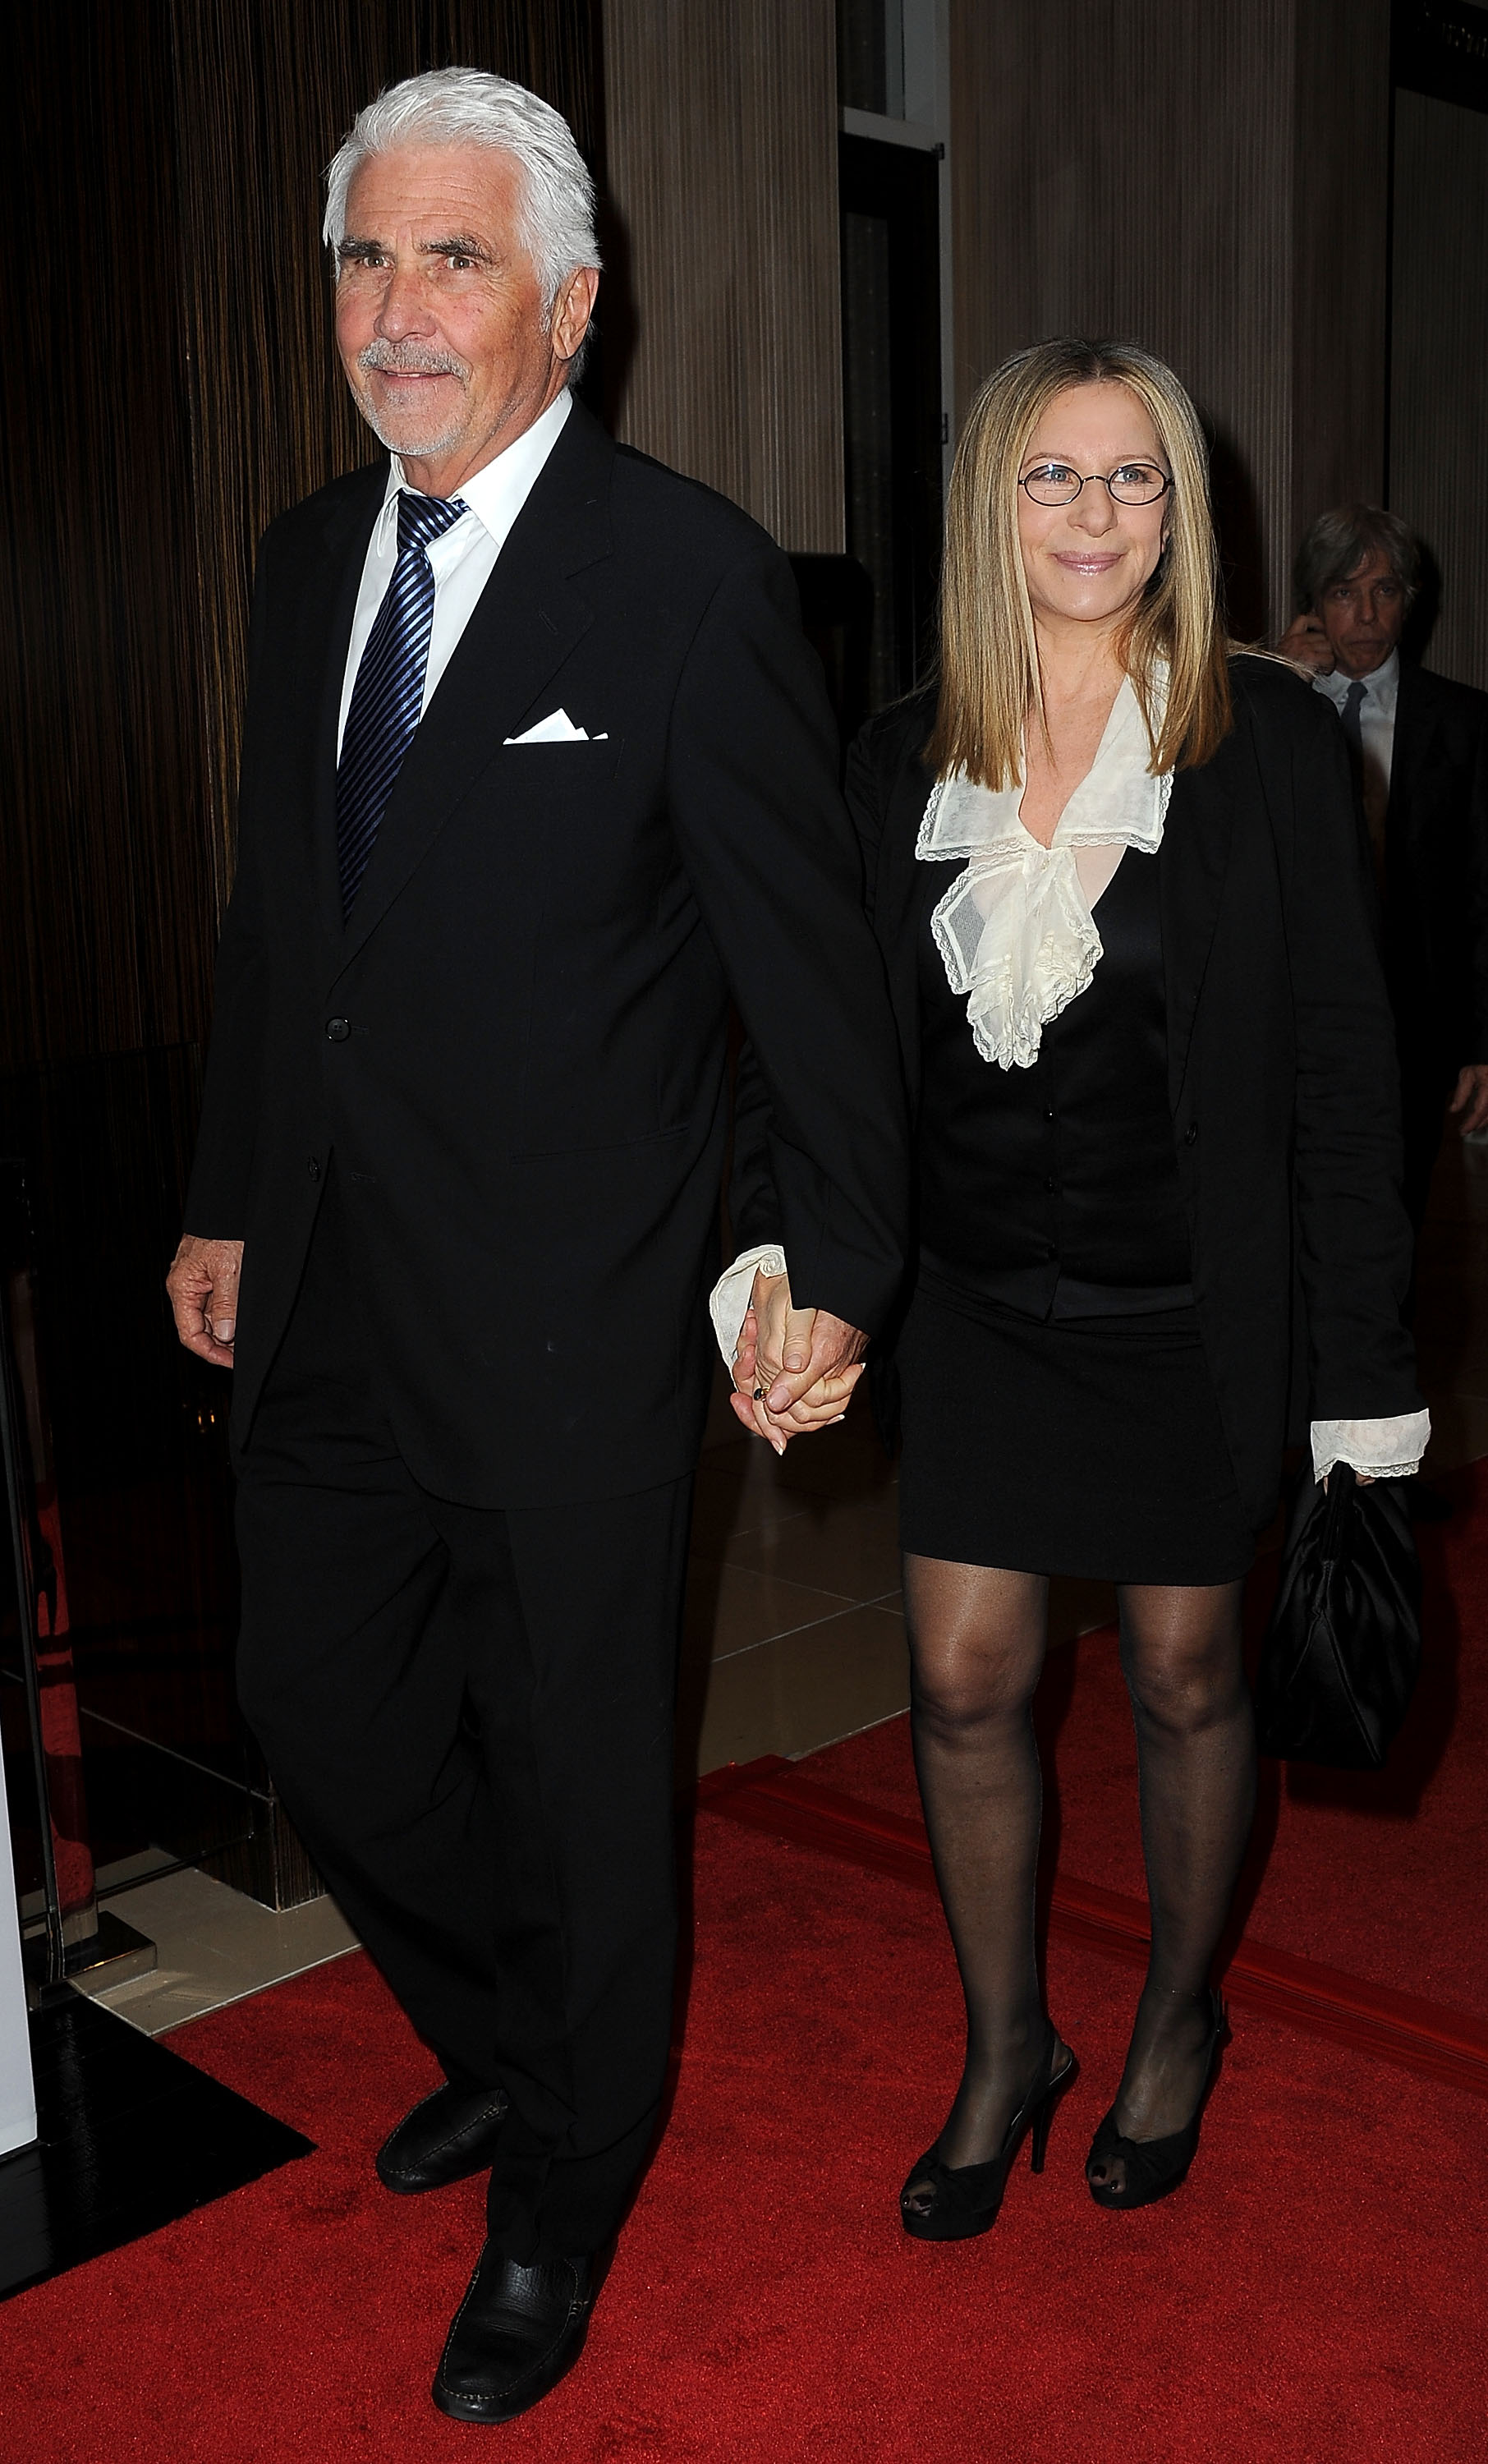 James Brolin and Barbara Streisand at The Cedars-Sinai Board Of Governors Annual Gala at The Beverly Hilton hotel on November 8, 2011 in Beverly Hills, California. | Source: Getty Images